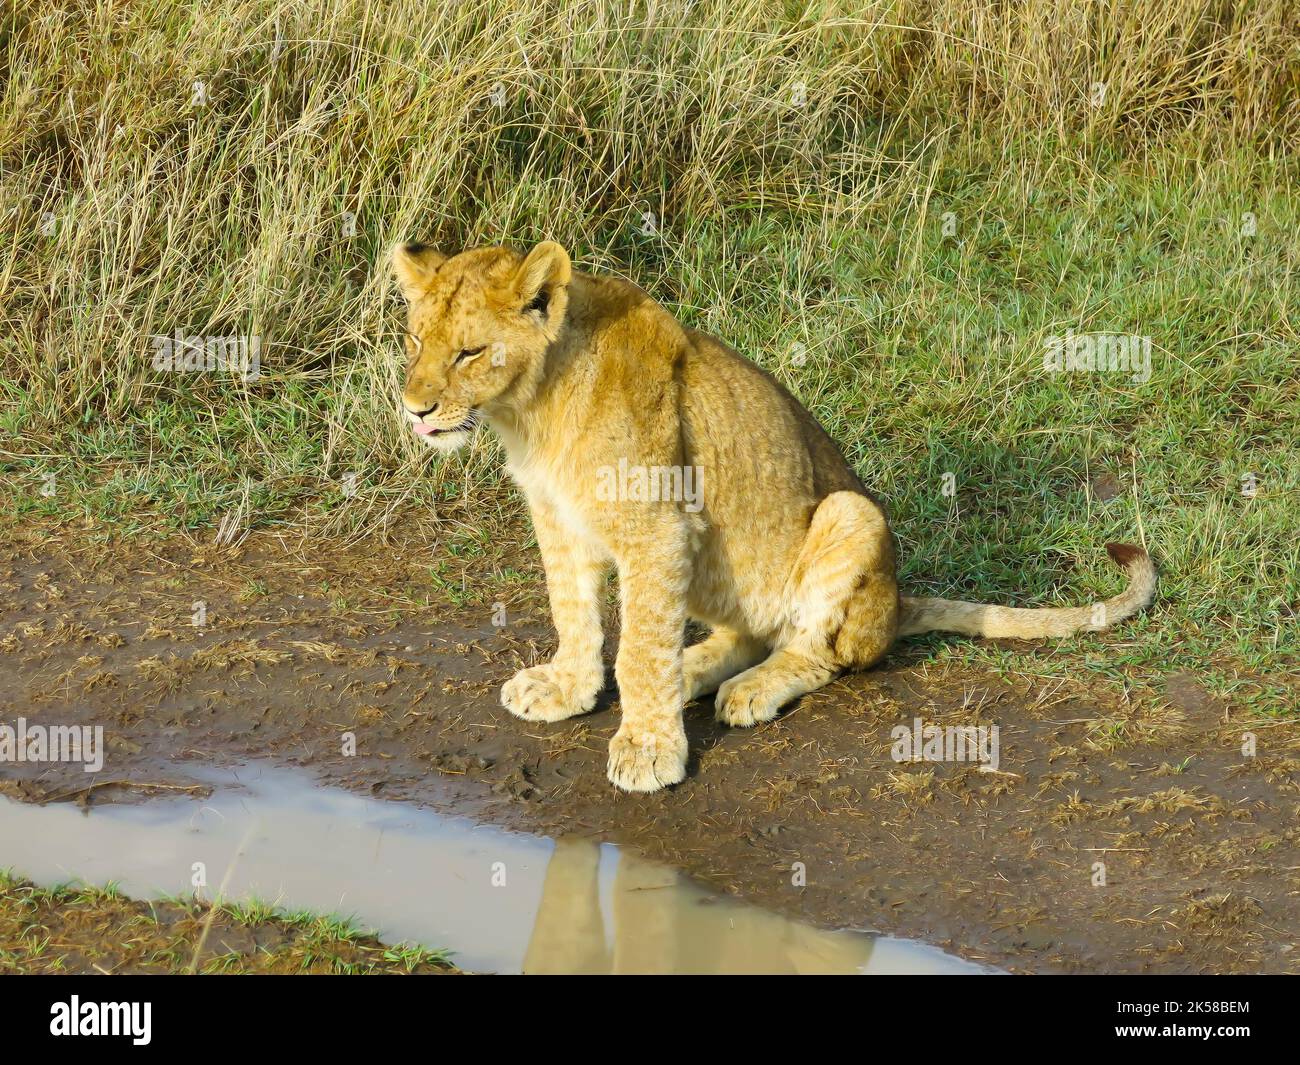 Lion at Rest, Serengeti National Park, Tanzania, East Africa Stock Photo